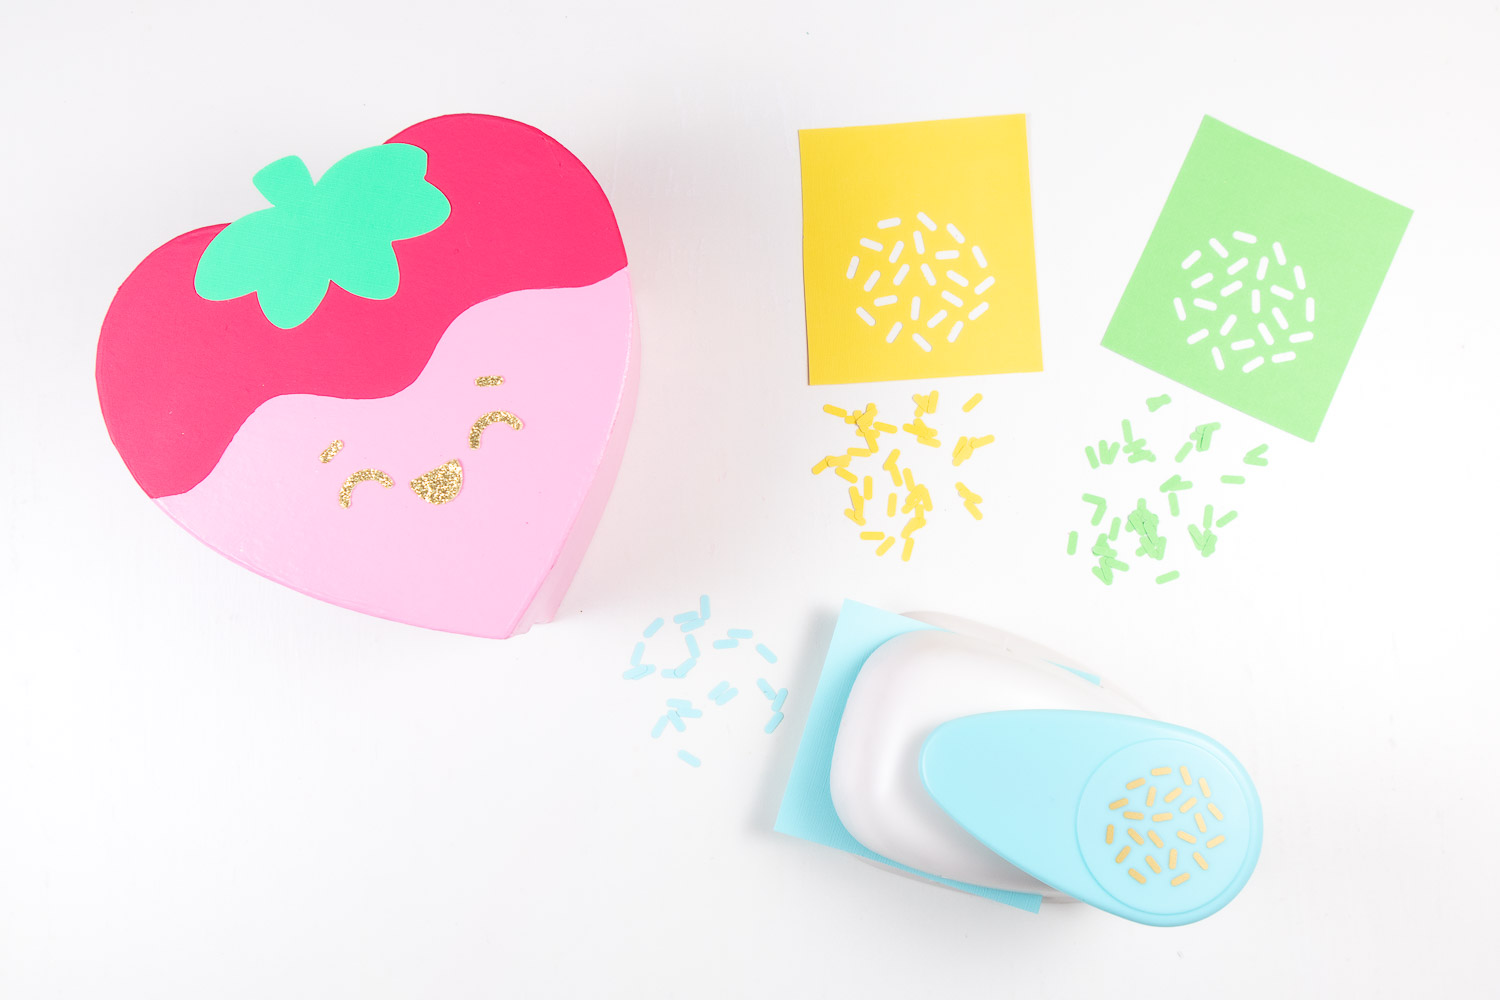 Cutting out colored sprinkles using sprinkles paper punch. Yellow, light green and light blue sprinkles are shown.